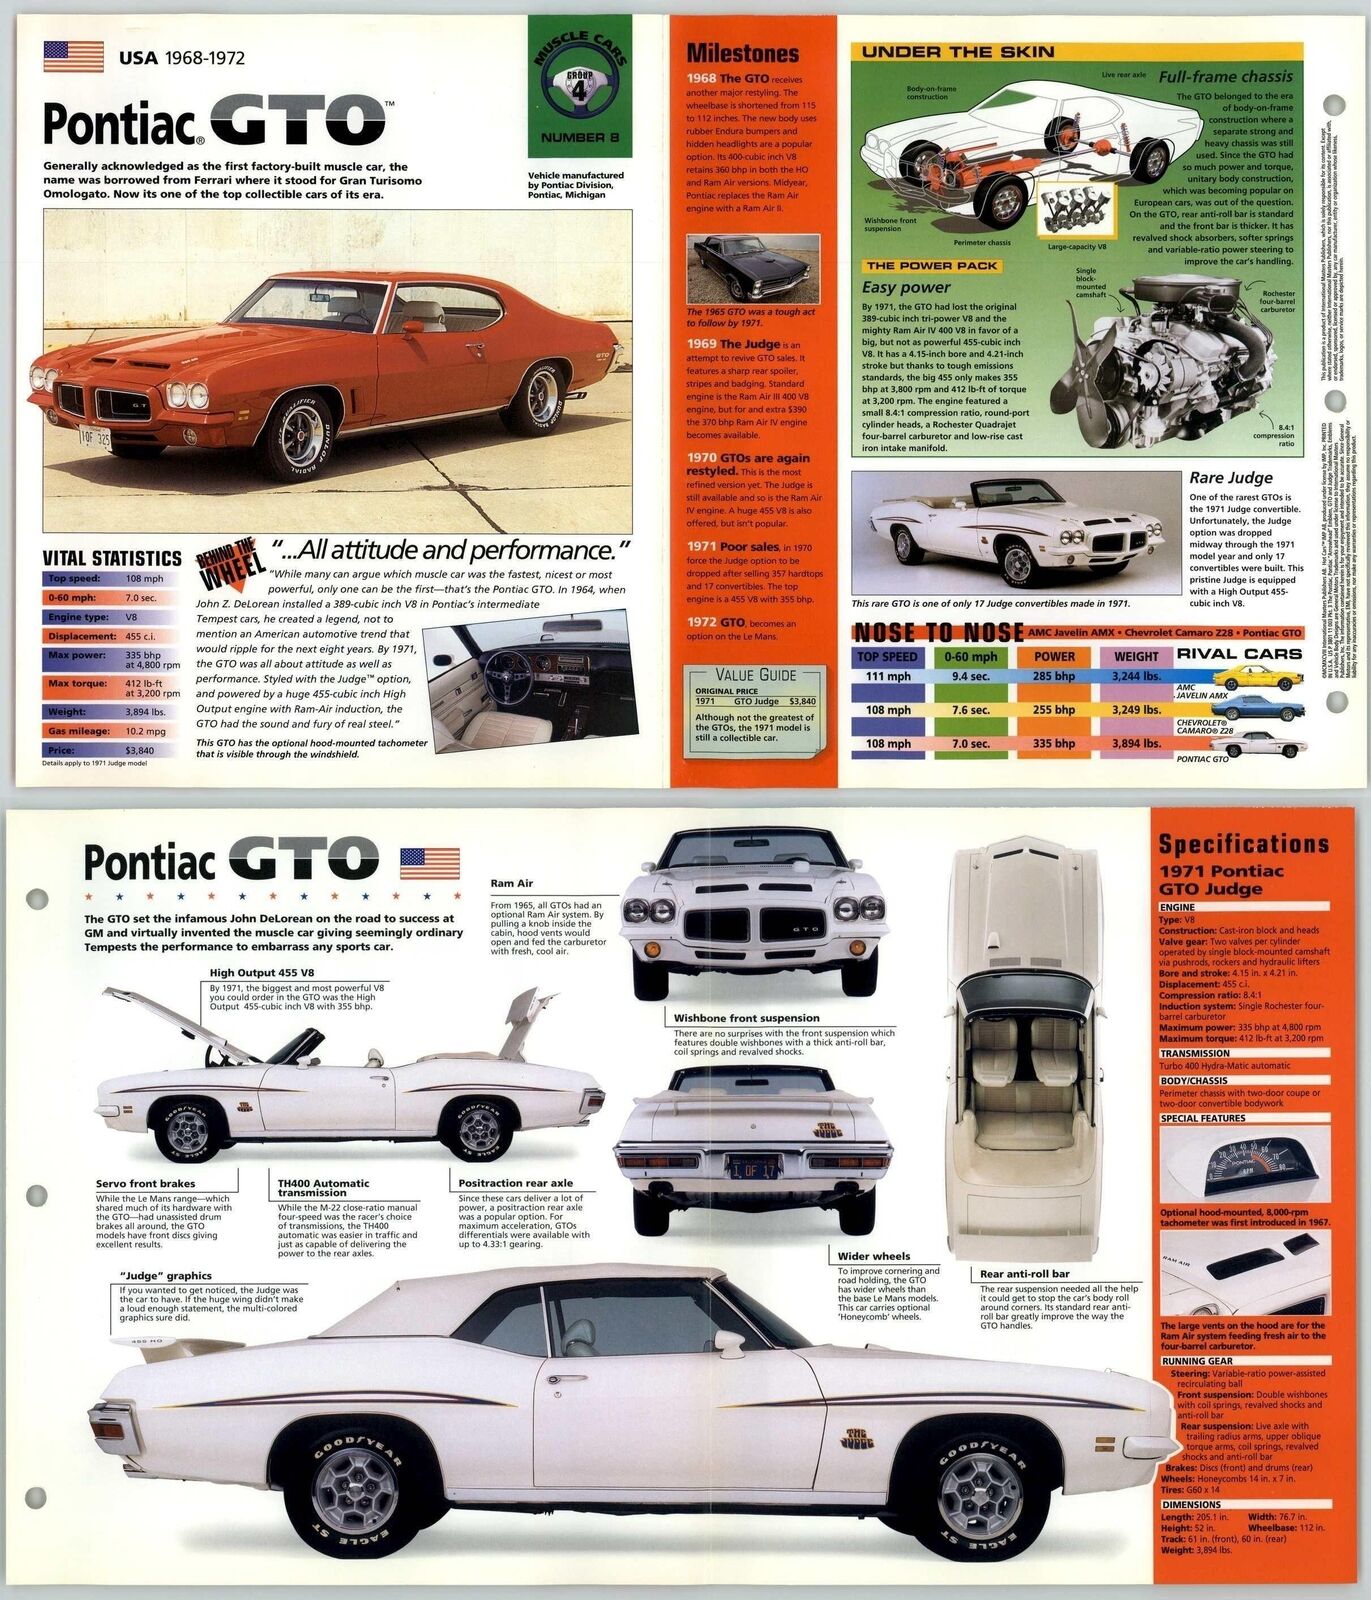 Poniac GTO - 1968-72 #8 Muscle Cars - Hot Cars - IMP Fold Out Fact Page